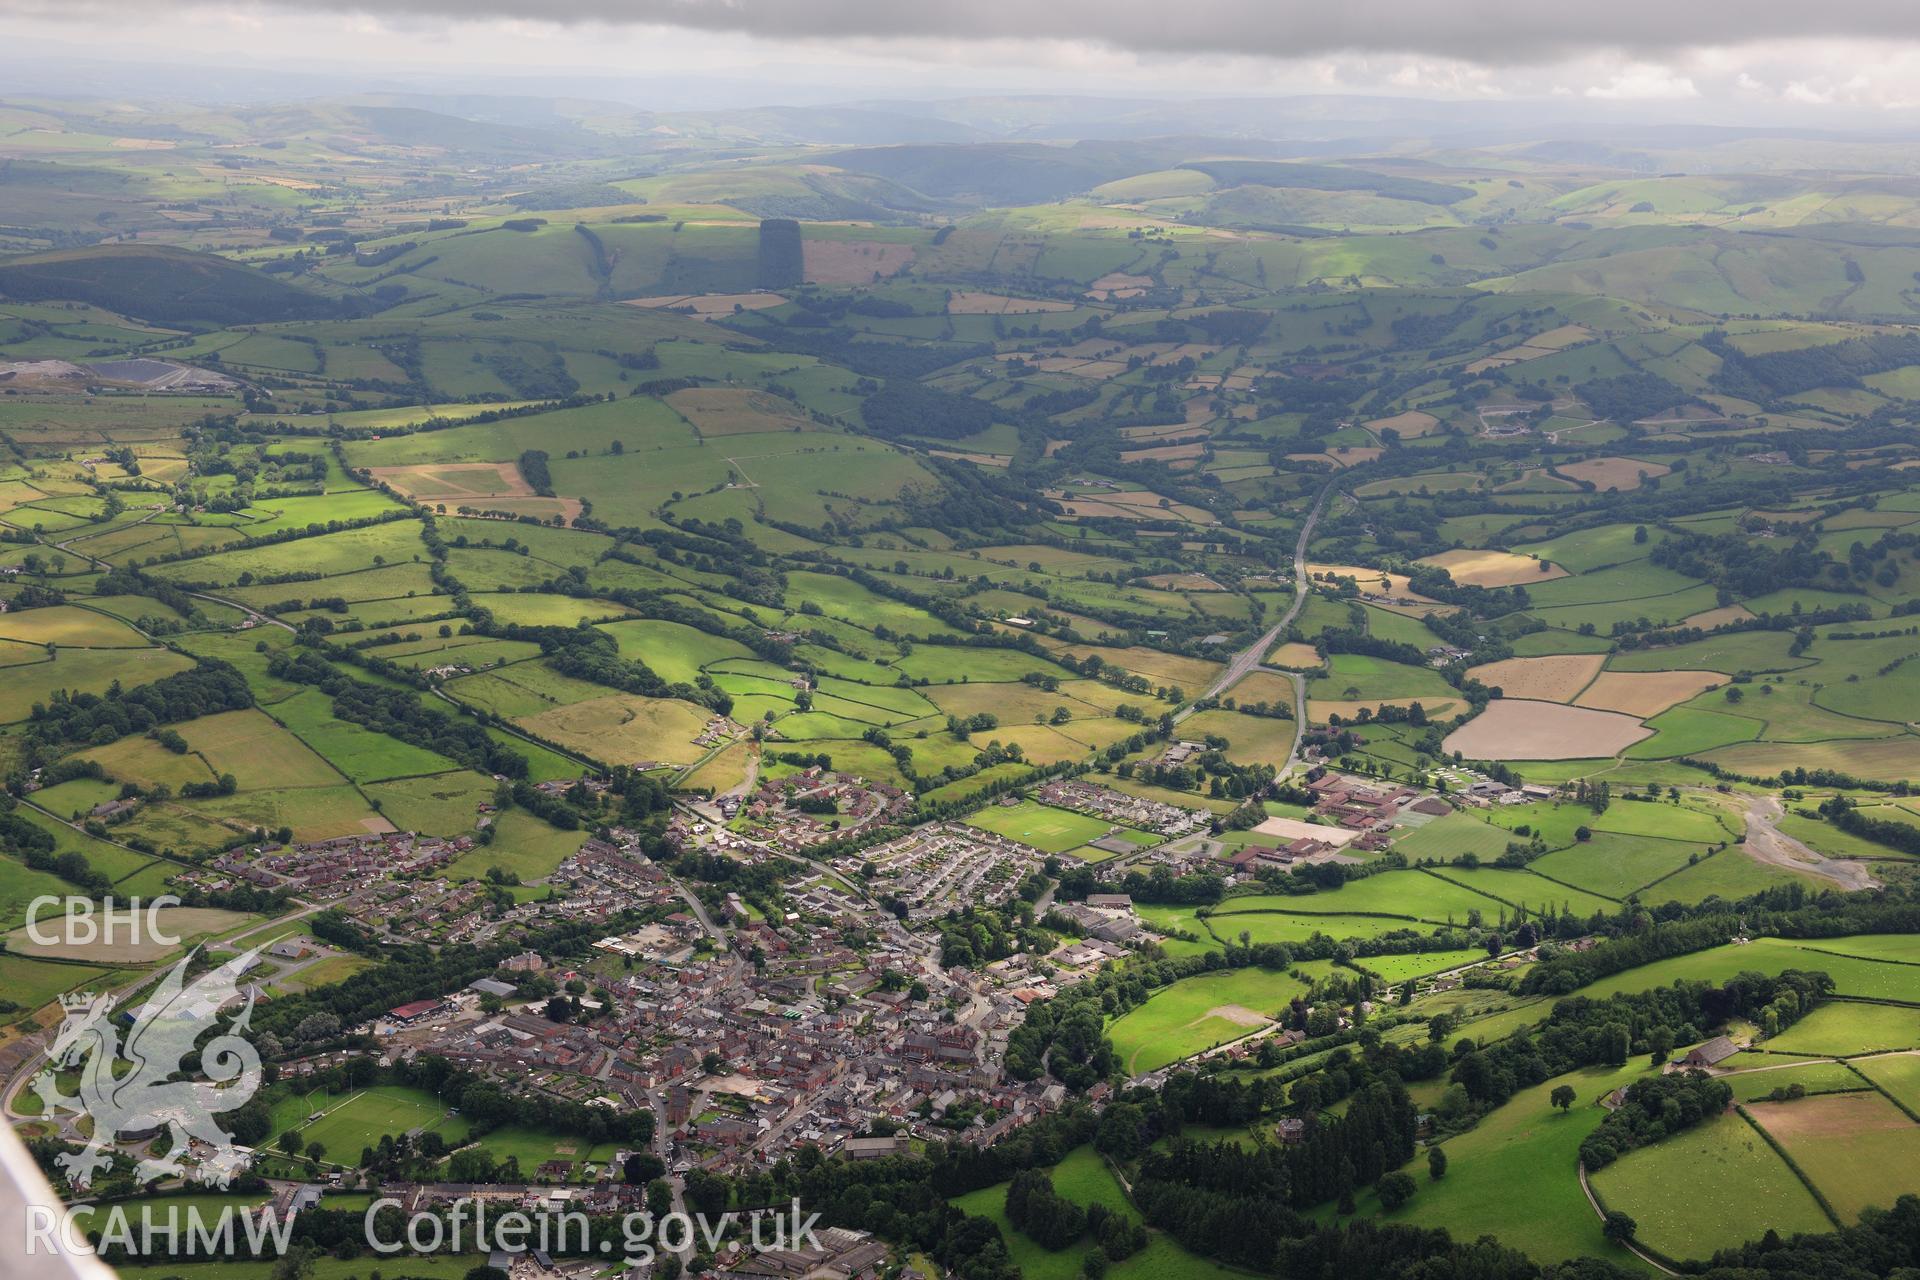 RCAHMW colour oblique photograph of Llanidloes. Taken by Toby Driver on 27/07/2012.